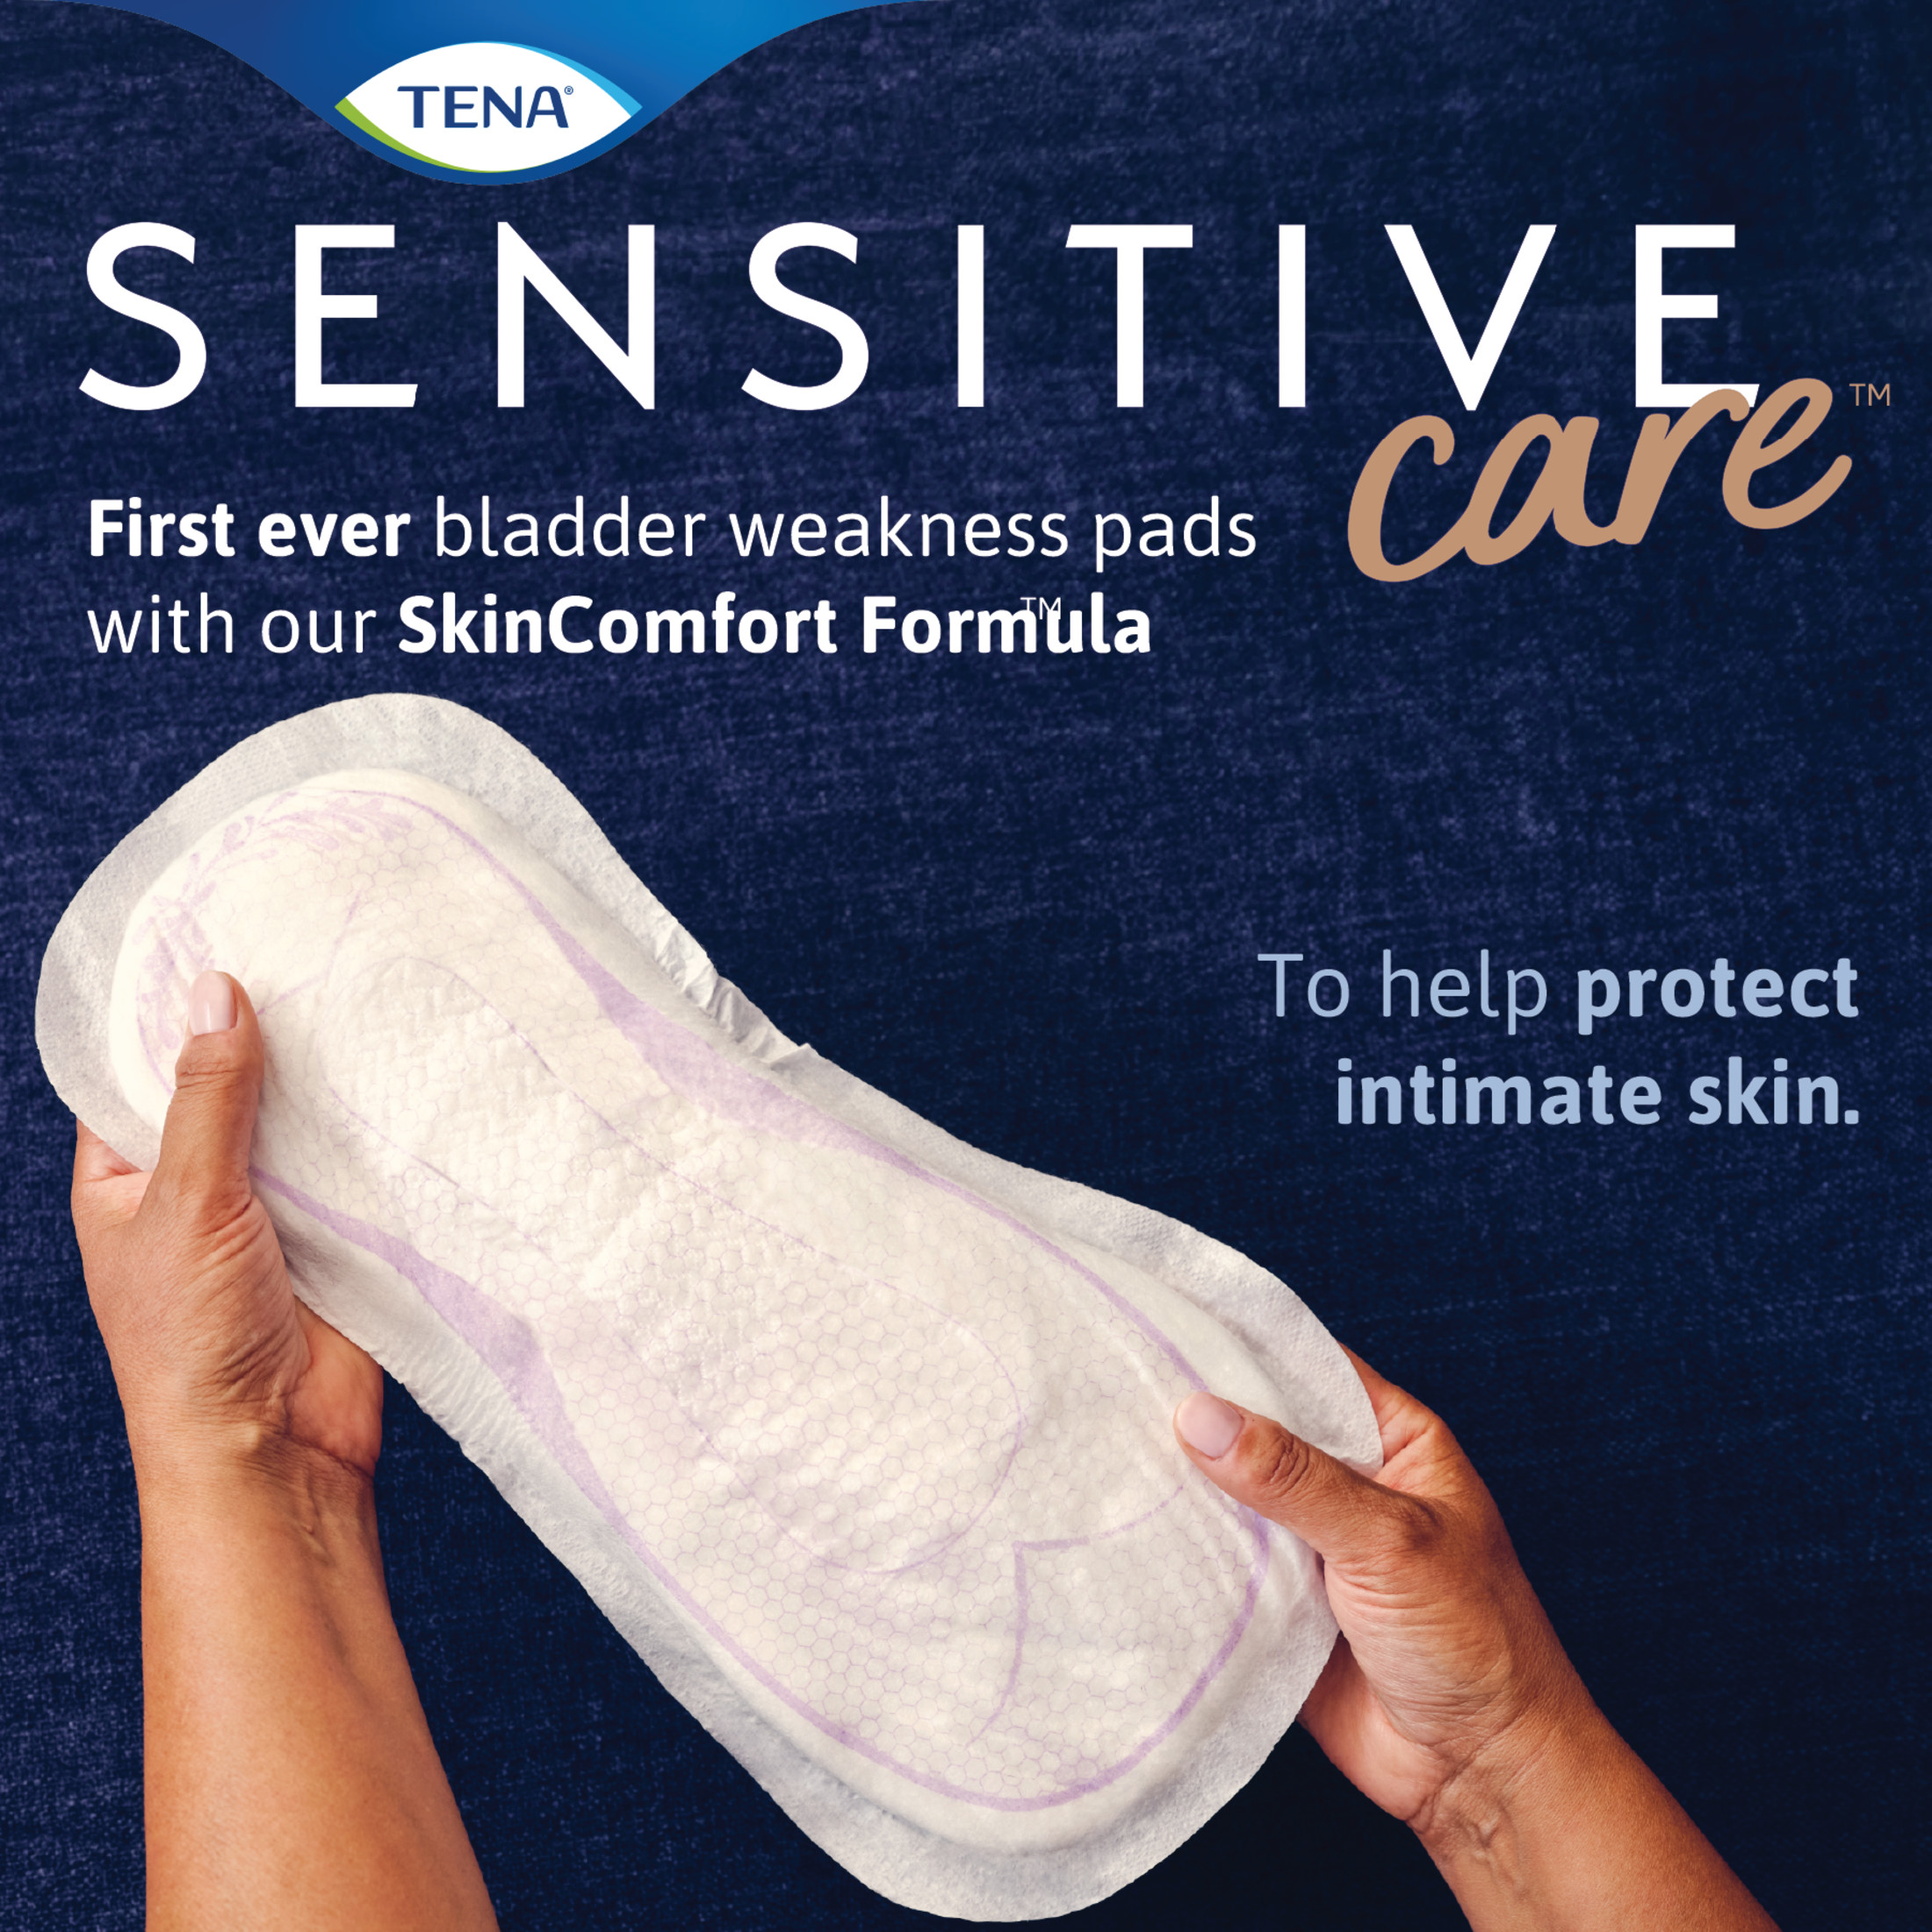 Tena Sensitive Care Extra Coverage Overnight Incontinence Pads, 45 Count - image 4 of 8